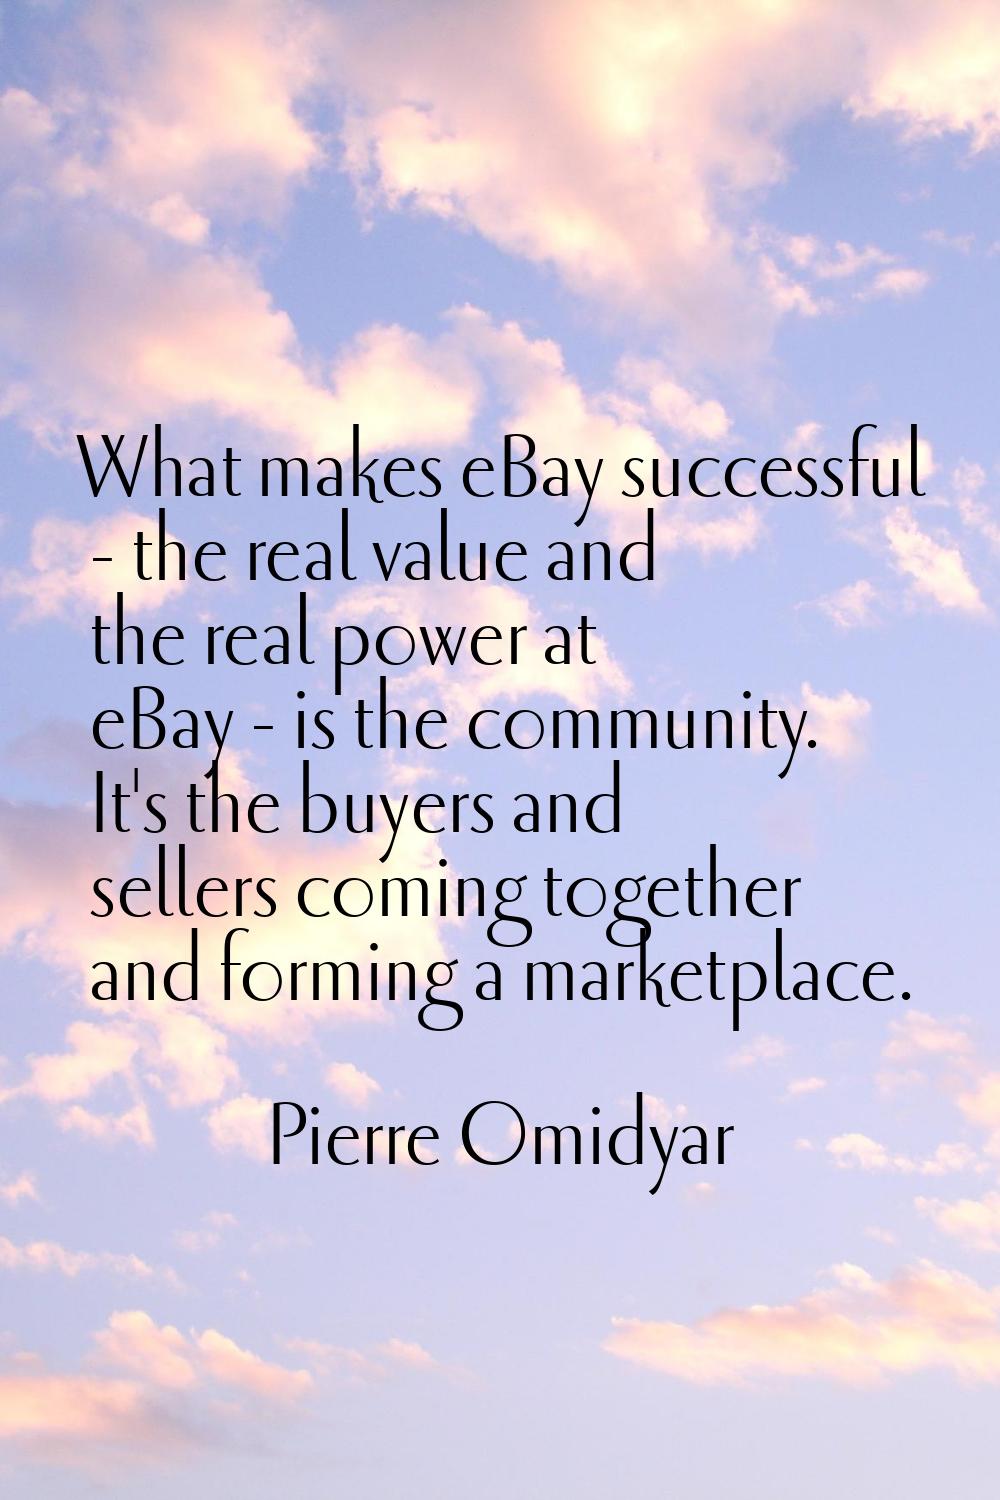 What makes eBay successful - the real value and the real power at eBay - is the community. It's the